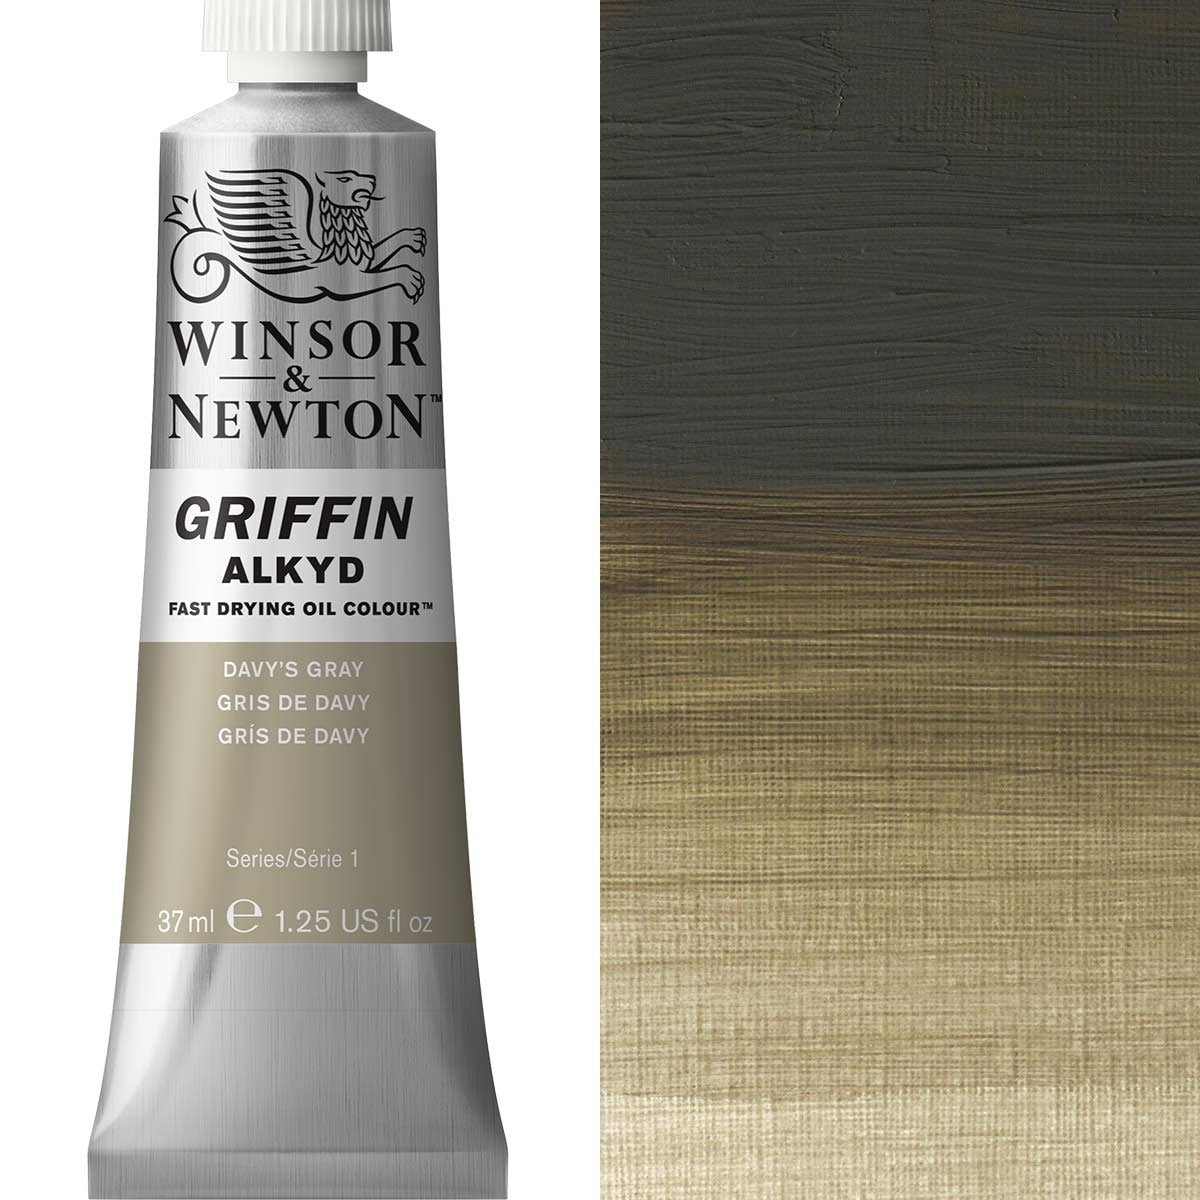 Winsor and Newton - Griffin ALKYD Oil Colour - 37ml - Davy's Grey